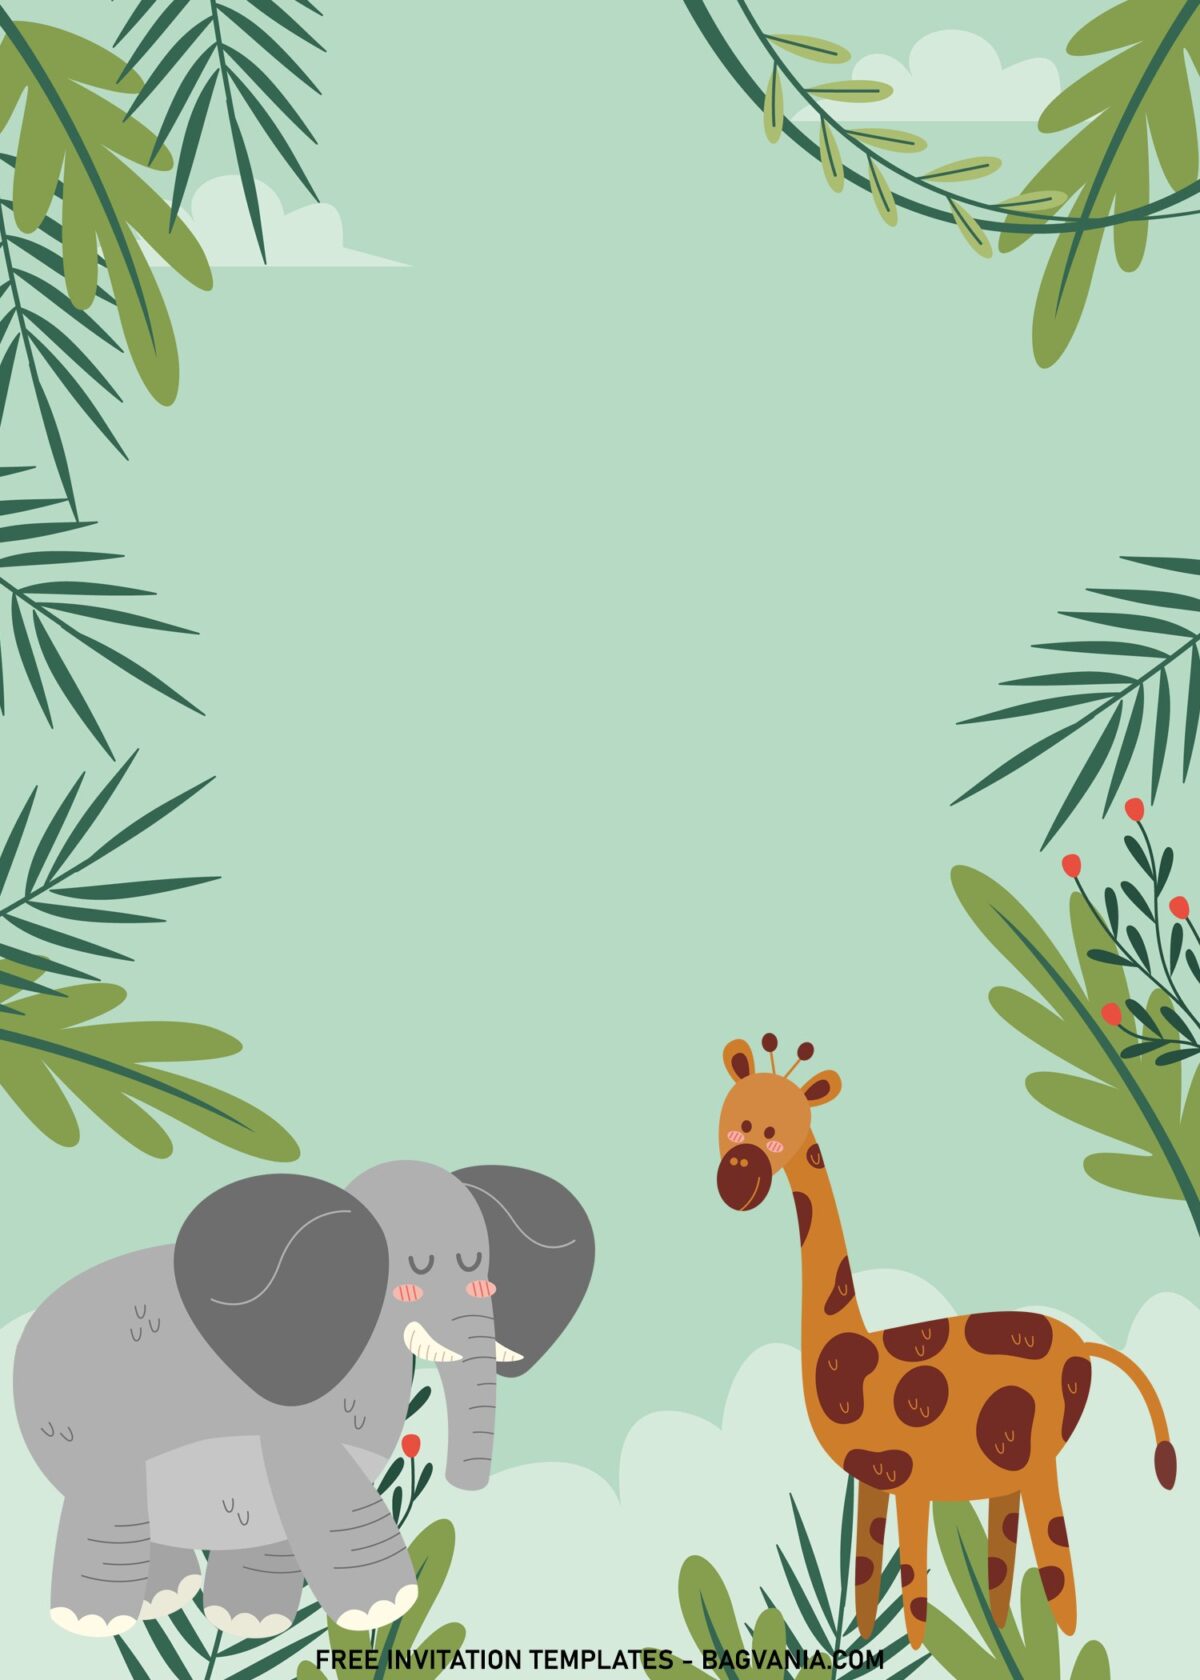 11+ Cute Safari Baby Animals Birthday Invitation Templates For Your Little Explorer with greenery leaves